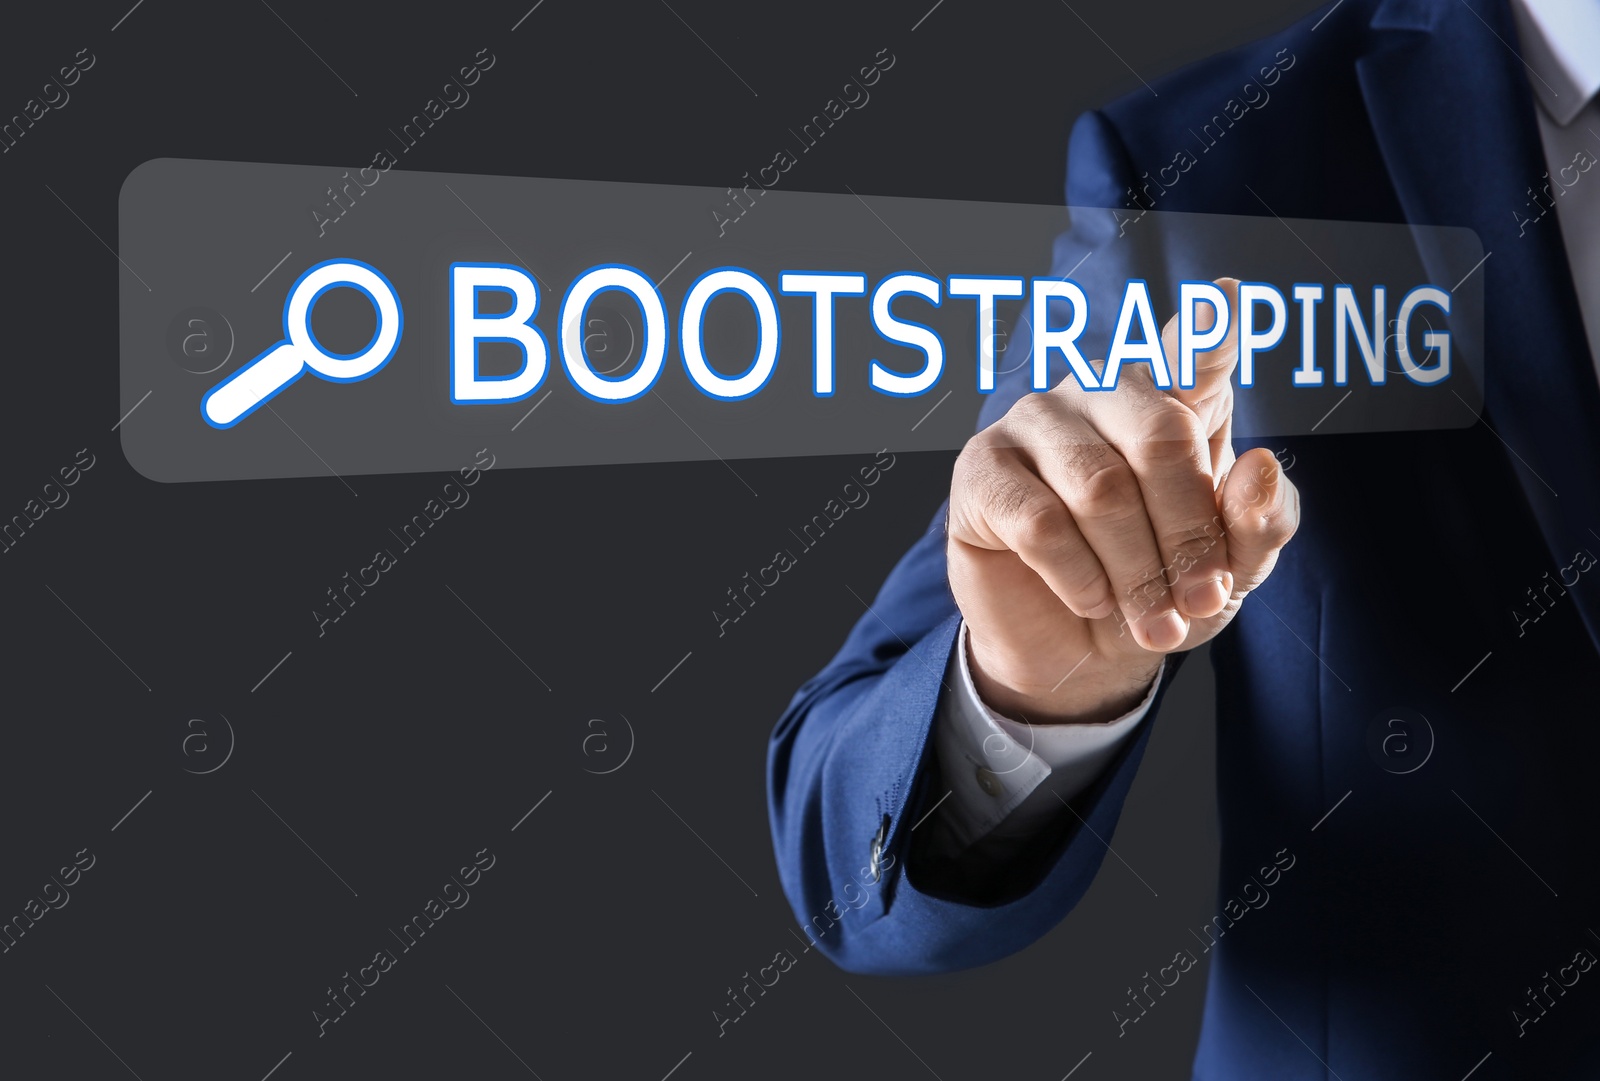 Image of Businessman touching virtual screen with word BOOTSTRAPPING in search bar against dark background, focus on hand